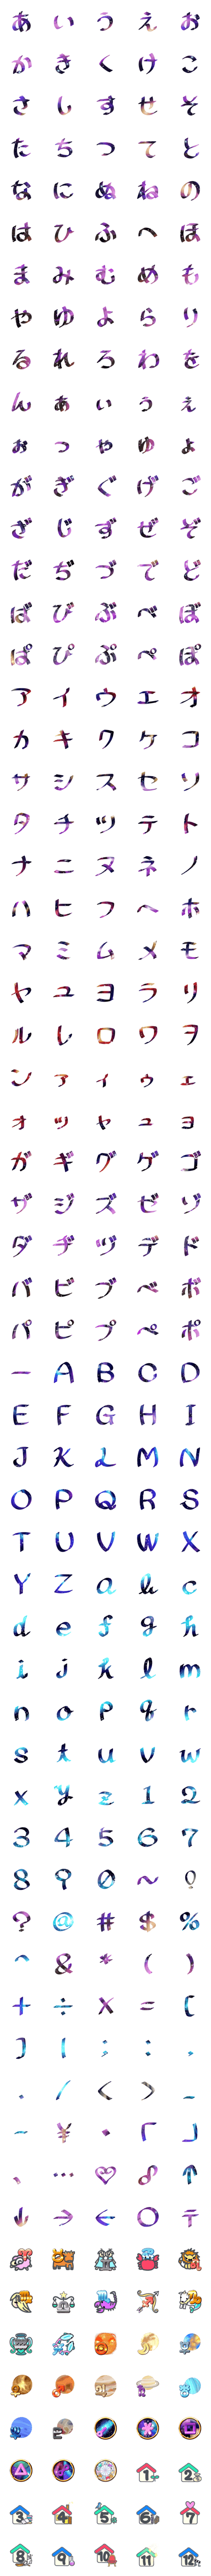 [LINE絵文字]ギャラクシー丸めデコ文字、占星術絵文字の画像一覧